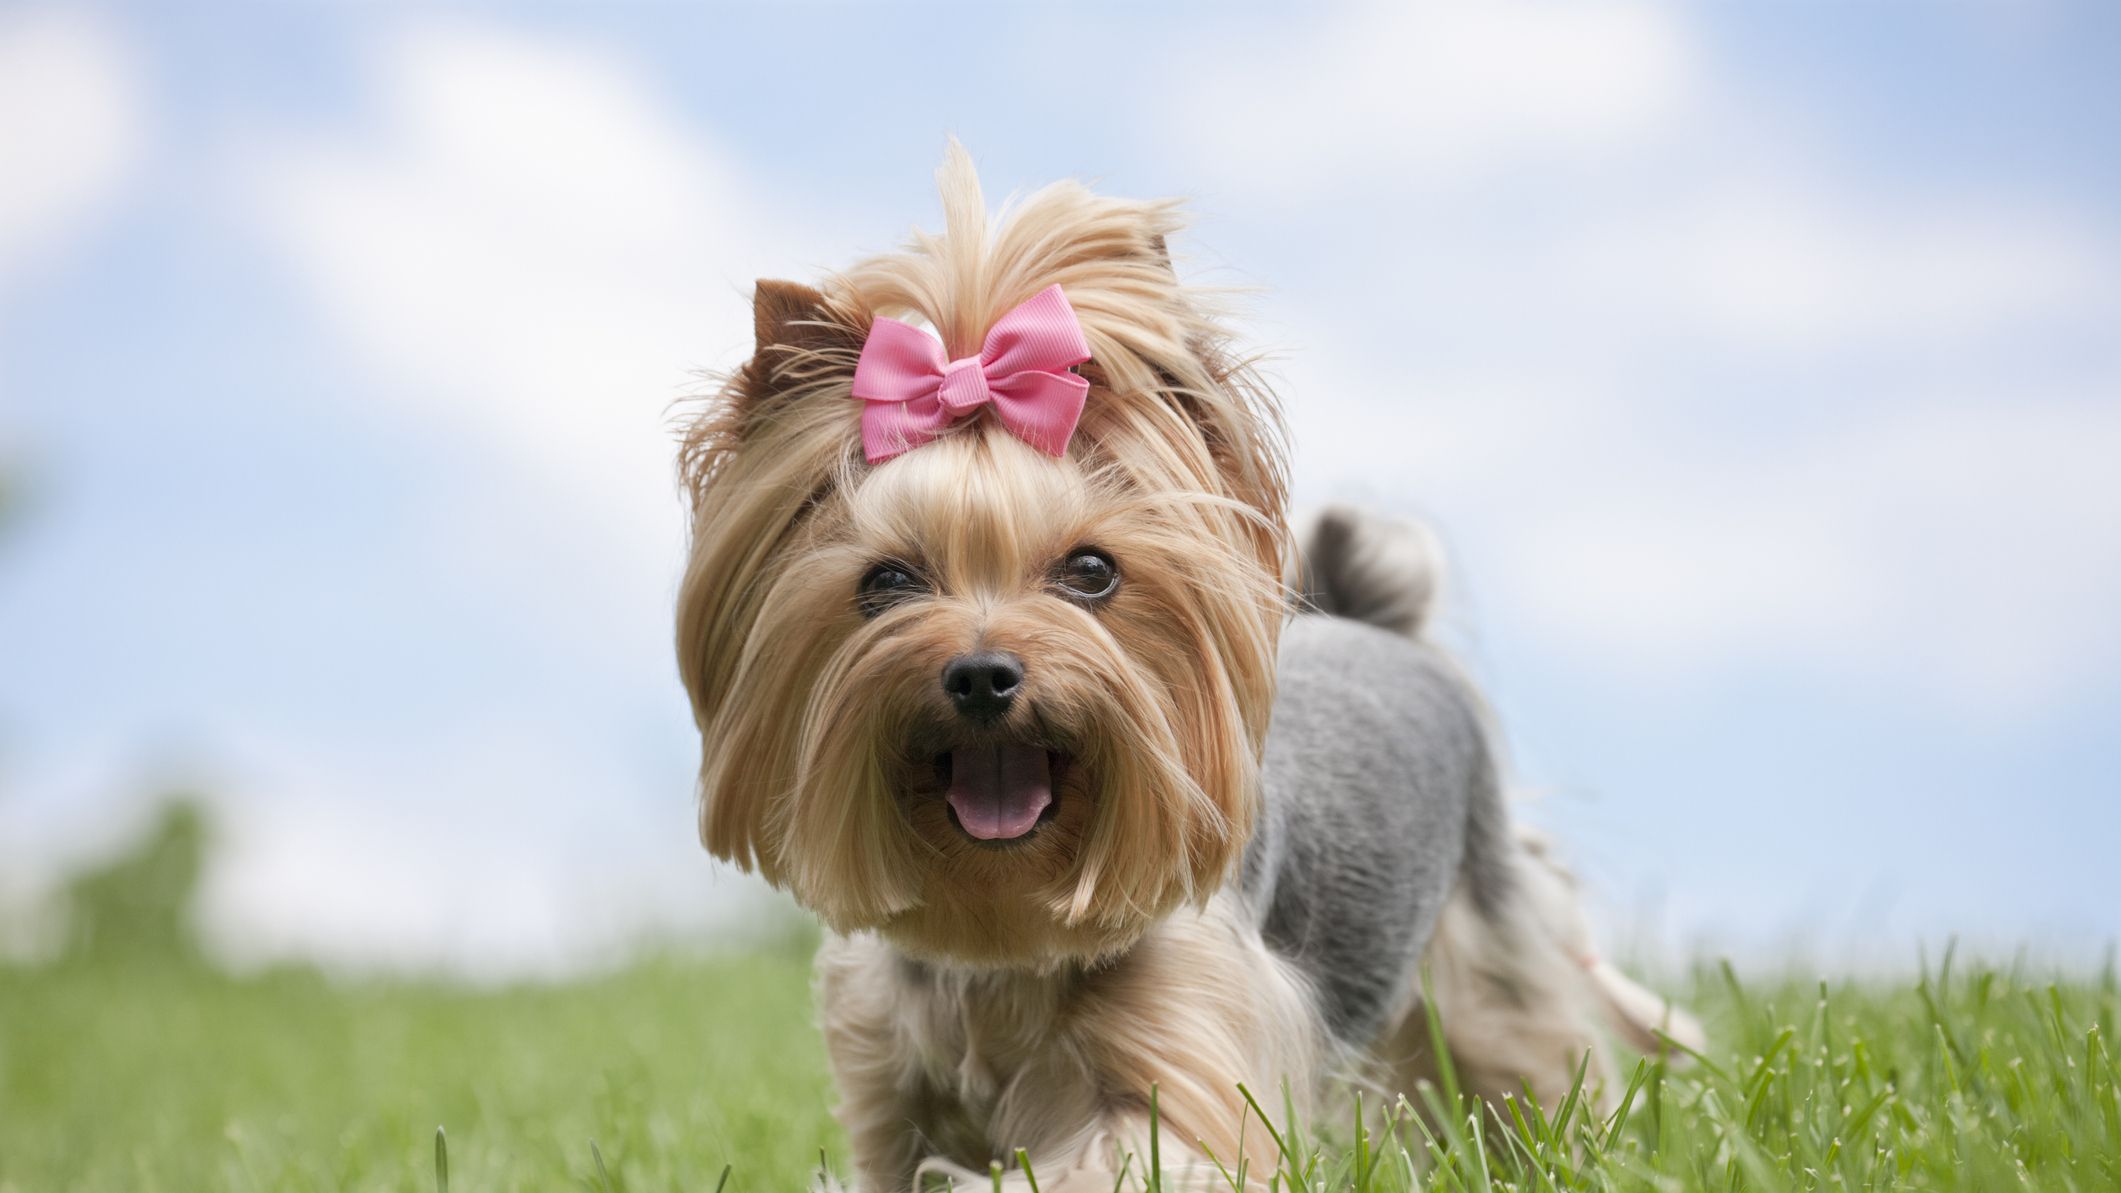 https://hips.hearstapps.com/hmg-prod/images/yorkshire-terrier-dog-running-in-the-grass-royalty-free-image-1676492141.jpg?crop=1xw:0.84355xh;center,top